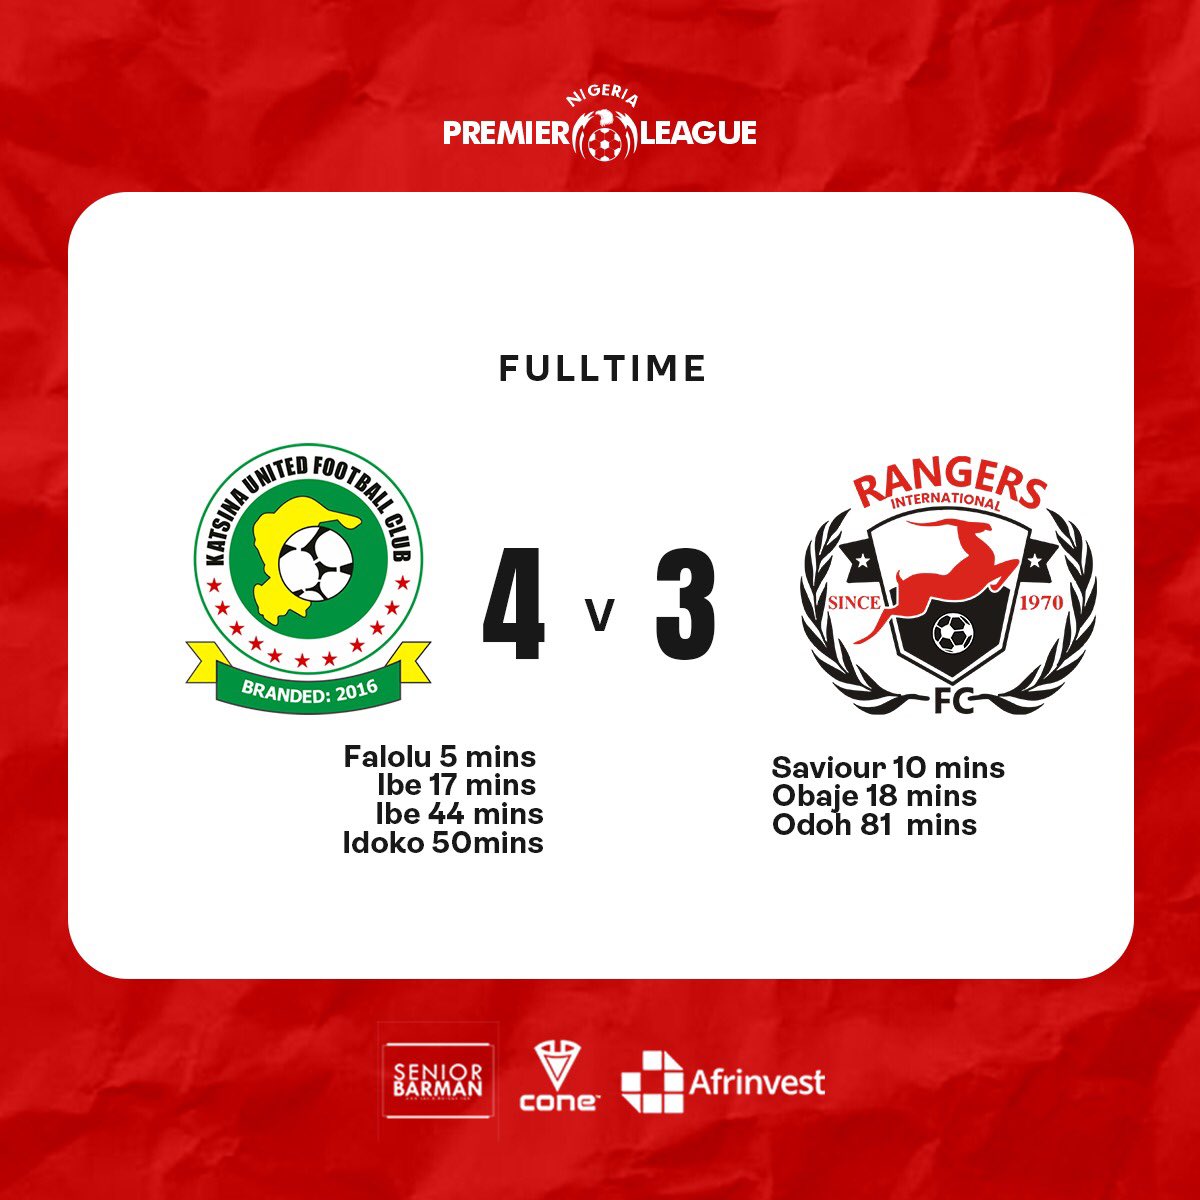 A defeat in Katsina. We keep our heads up and hope to rise stronger.

#KATRAN #NPFL24
#HistoryTogether #NeverSayDie